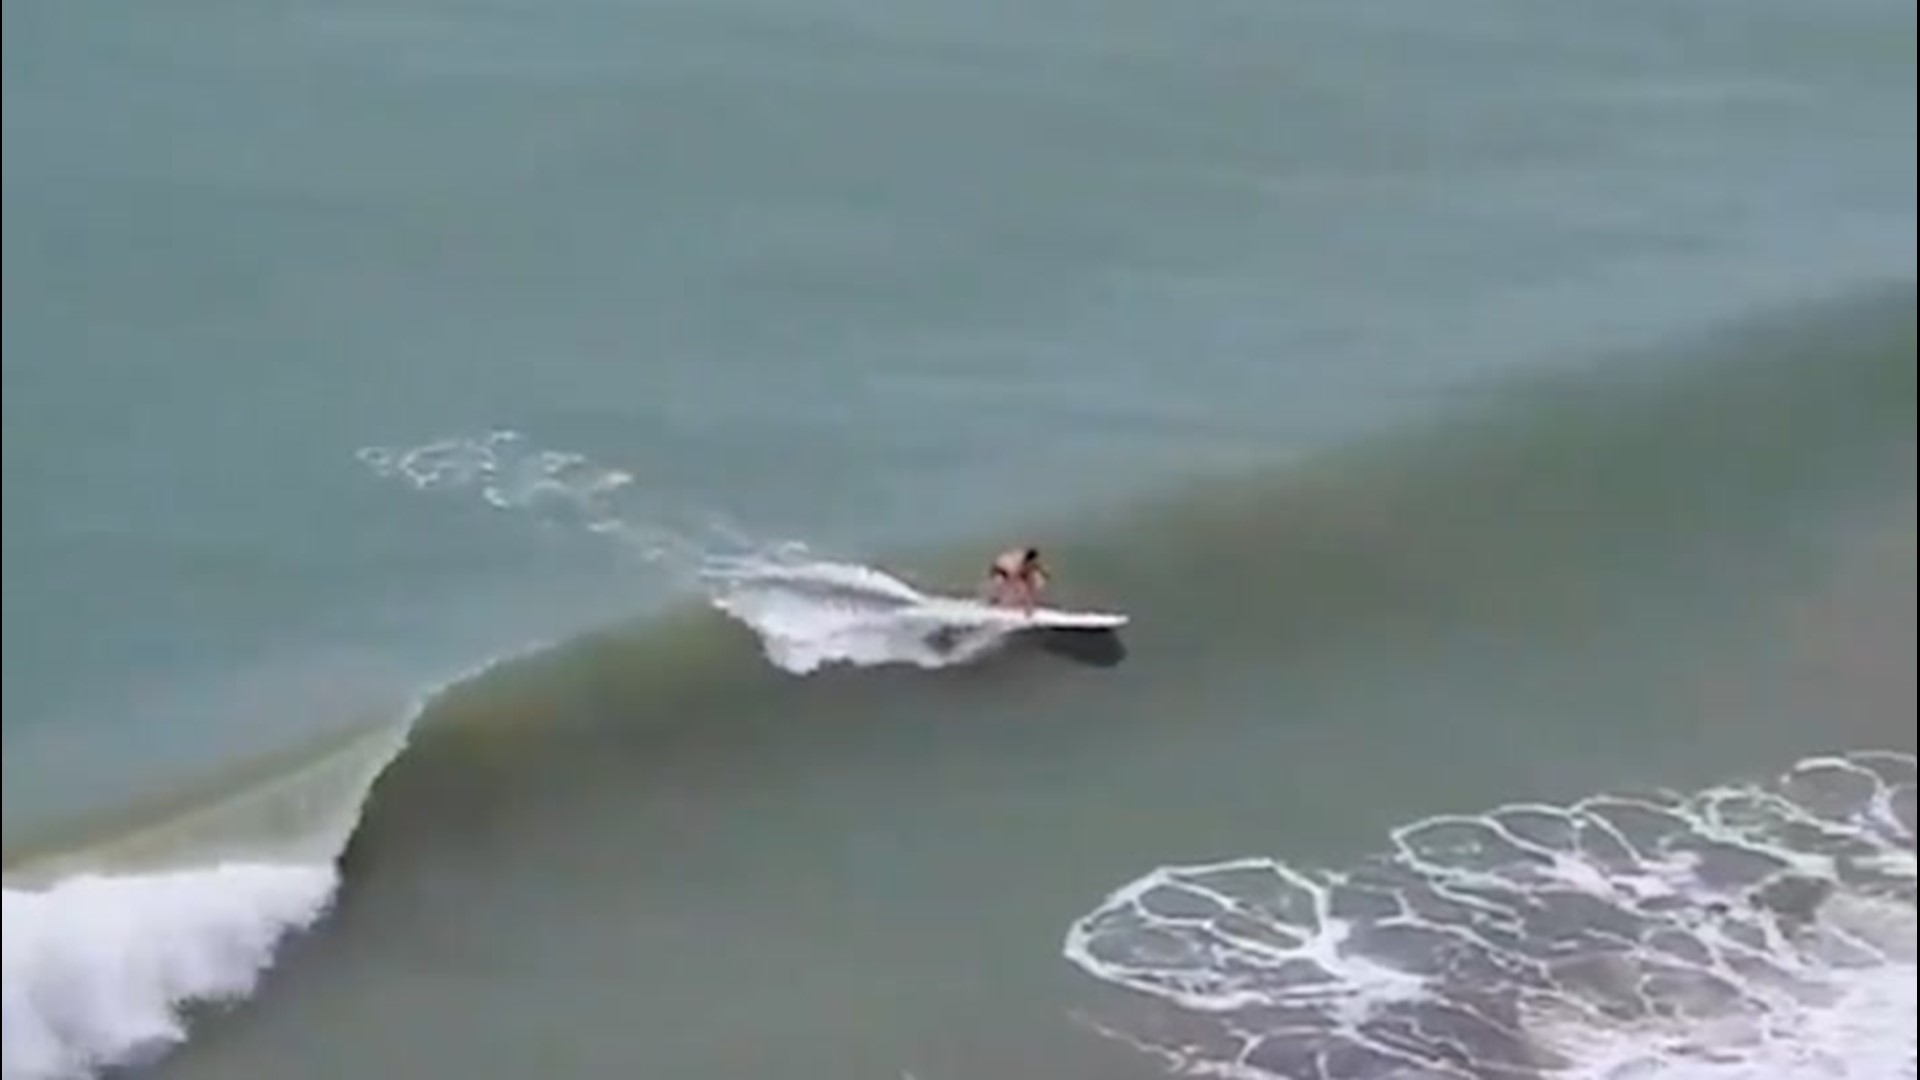 As Isaias churned off the coast of Florida on Aug. 2, surfers in Fort Lauderdale caught some waves.